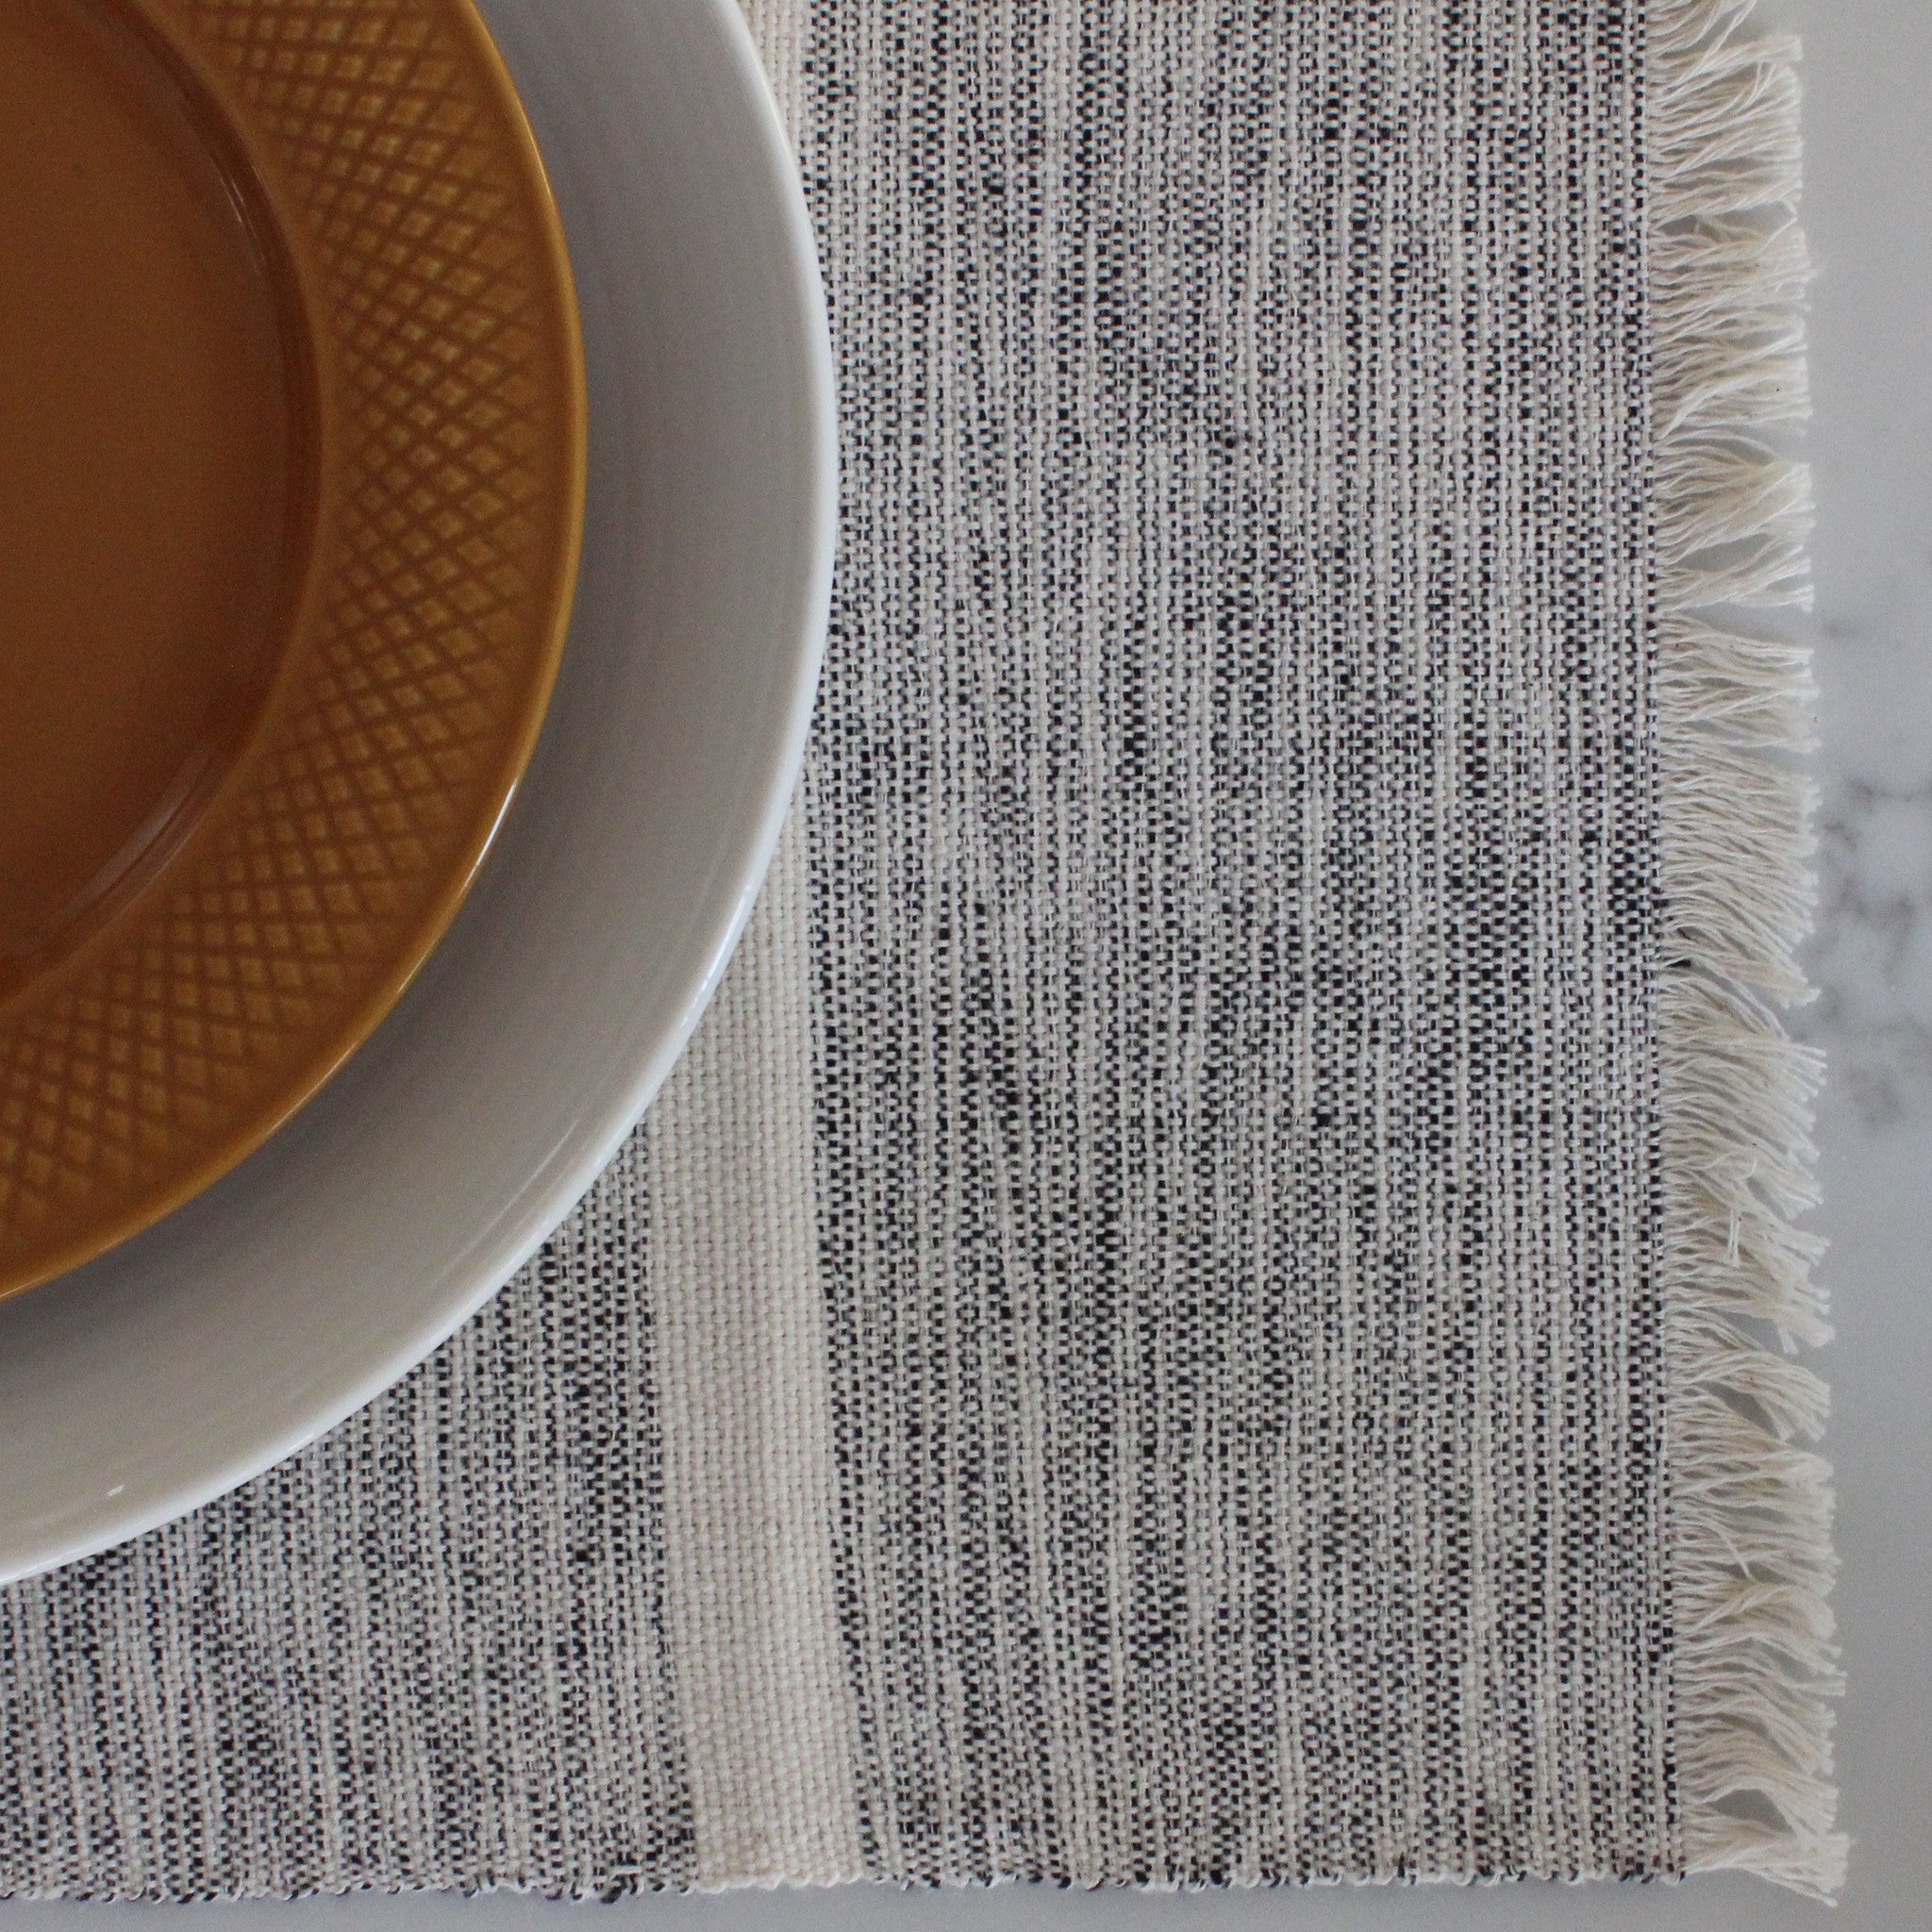 INDI mixed grey and natural striped placemats woven by hand with 100% ecologically dyed cotton by Living Threads Co.